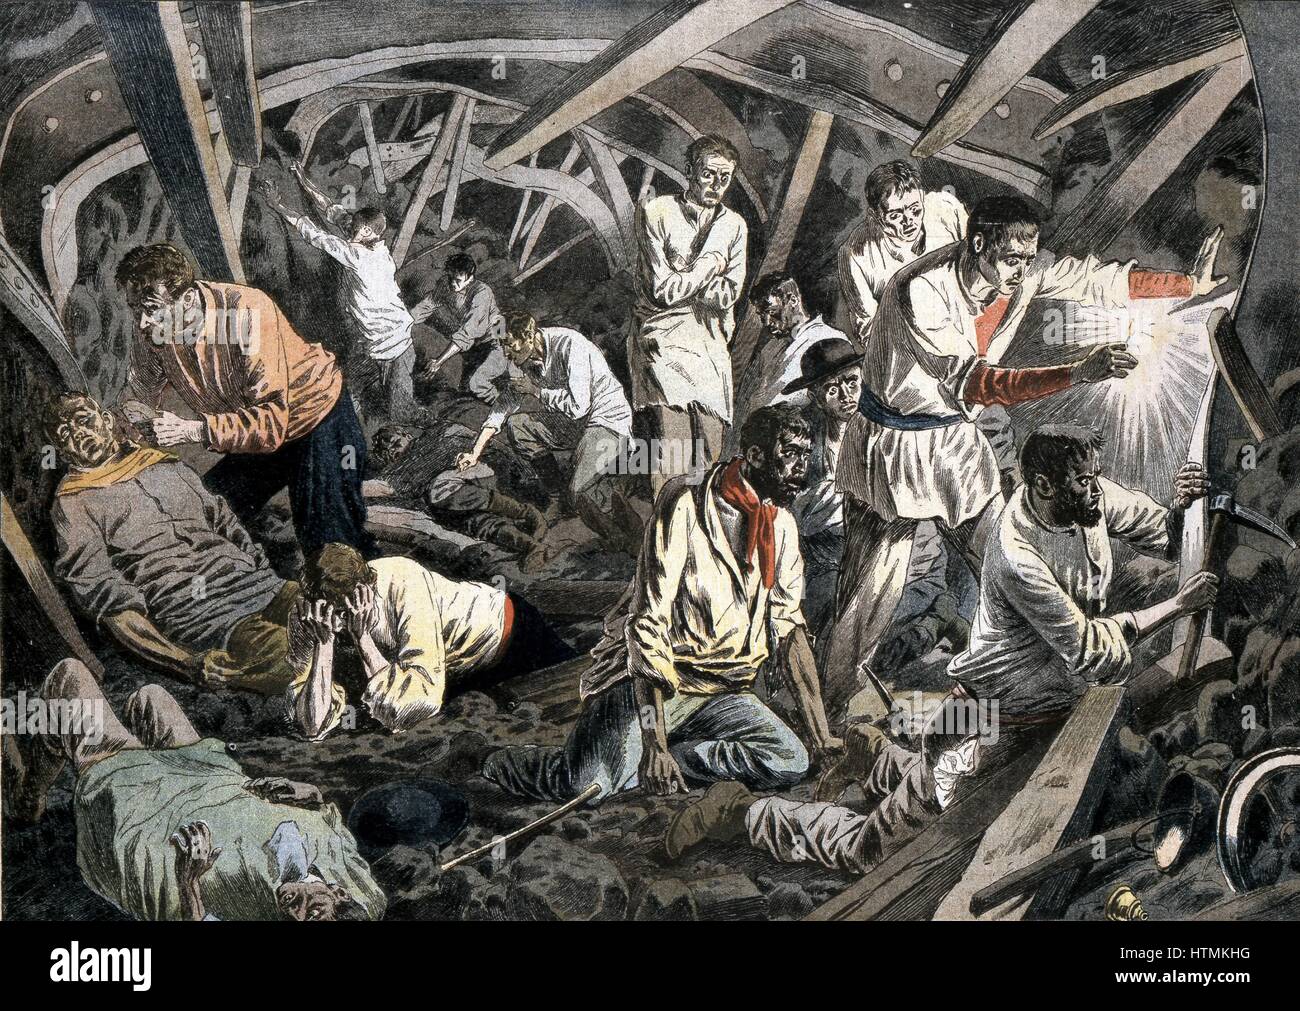 Coal miners trapped 24 days underground after roof fall. Survived by eating carrots and oats they found in the pit pony stables, Courrieres Mines, Pas de Calais. France. From 'Le Petit Journal' Paris 15 April 1906 Stock Photo